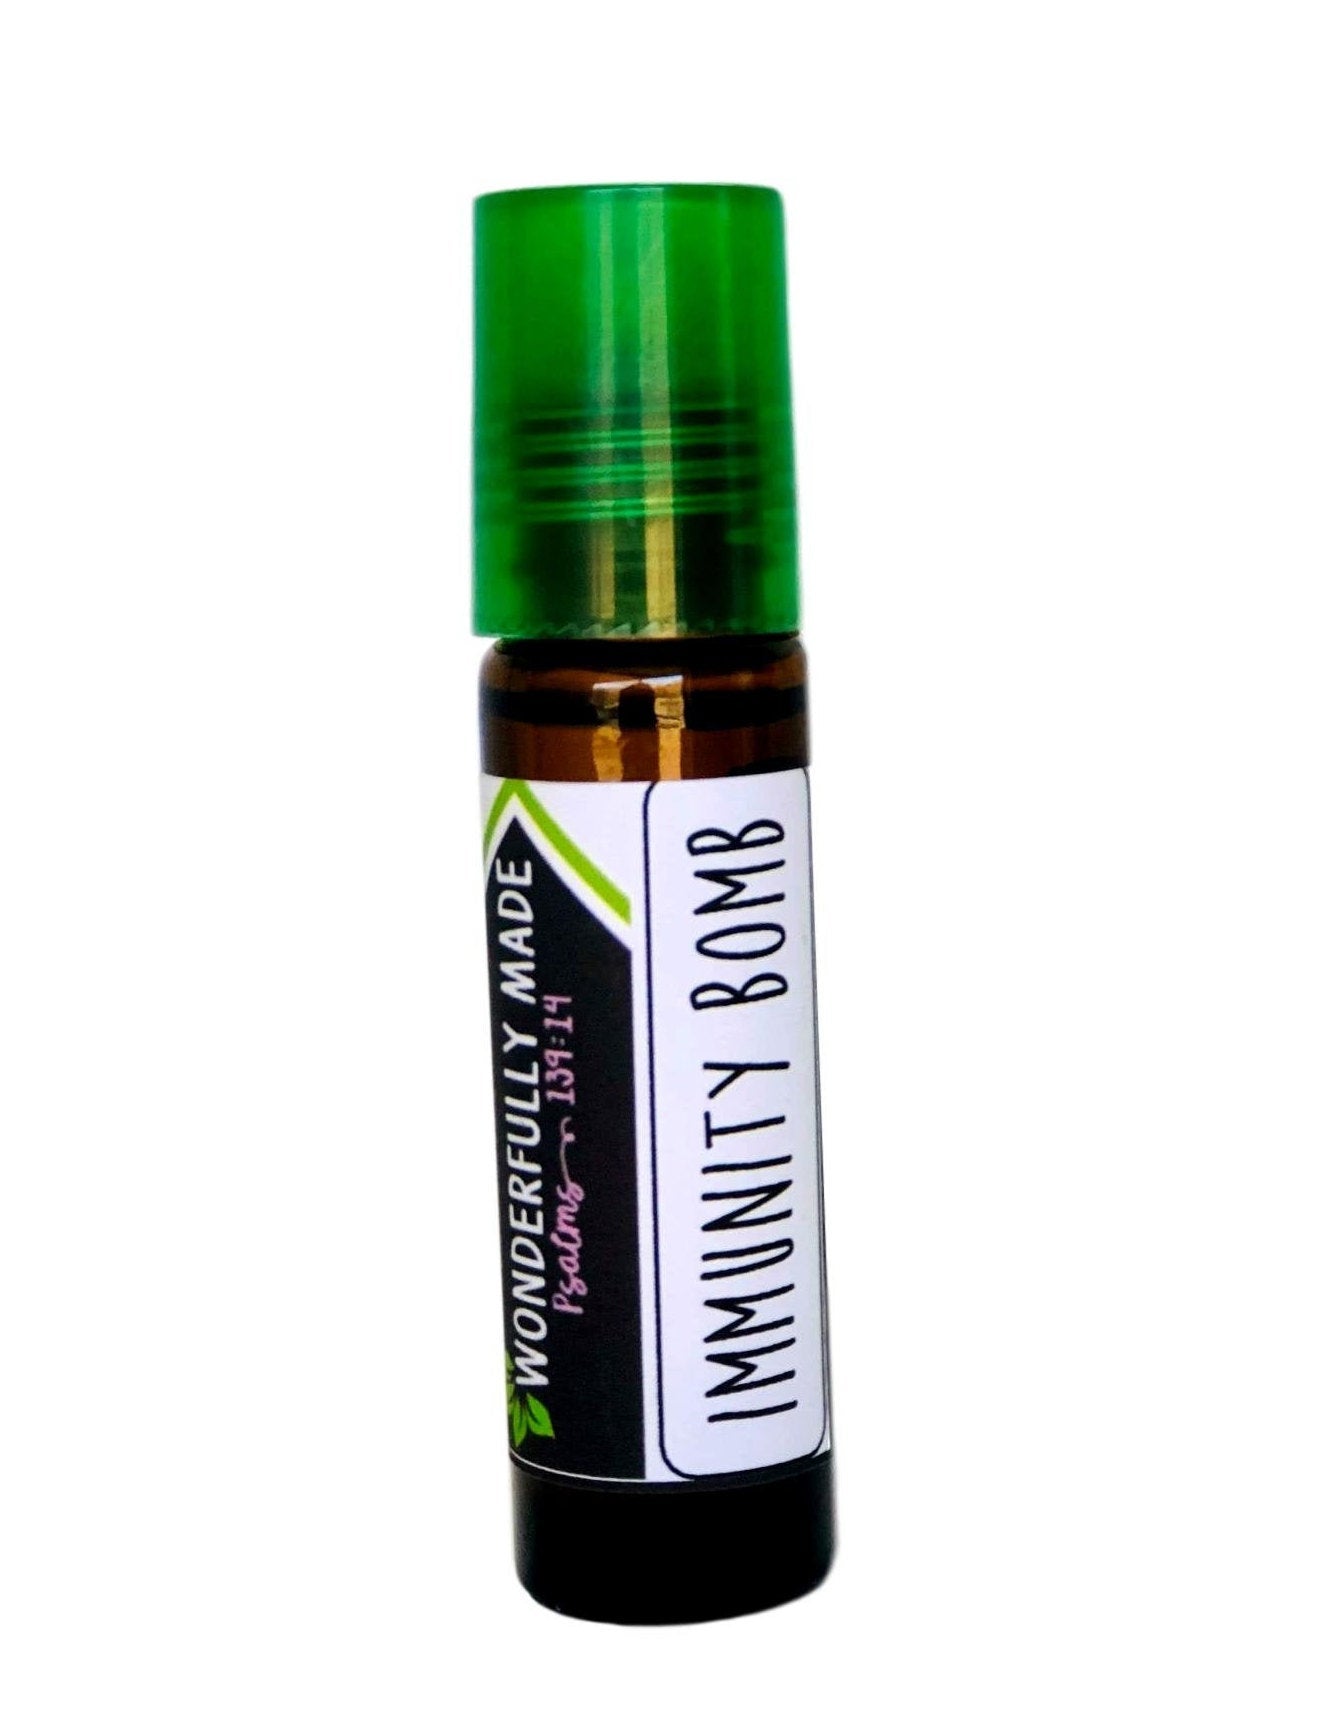 Immunity Bomb Roller / Roll on / Essential oils / Organic / Flu / Cold / Prevention / Recovery / Natural Immune System Boost / kids / adults